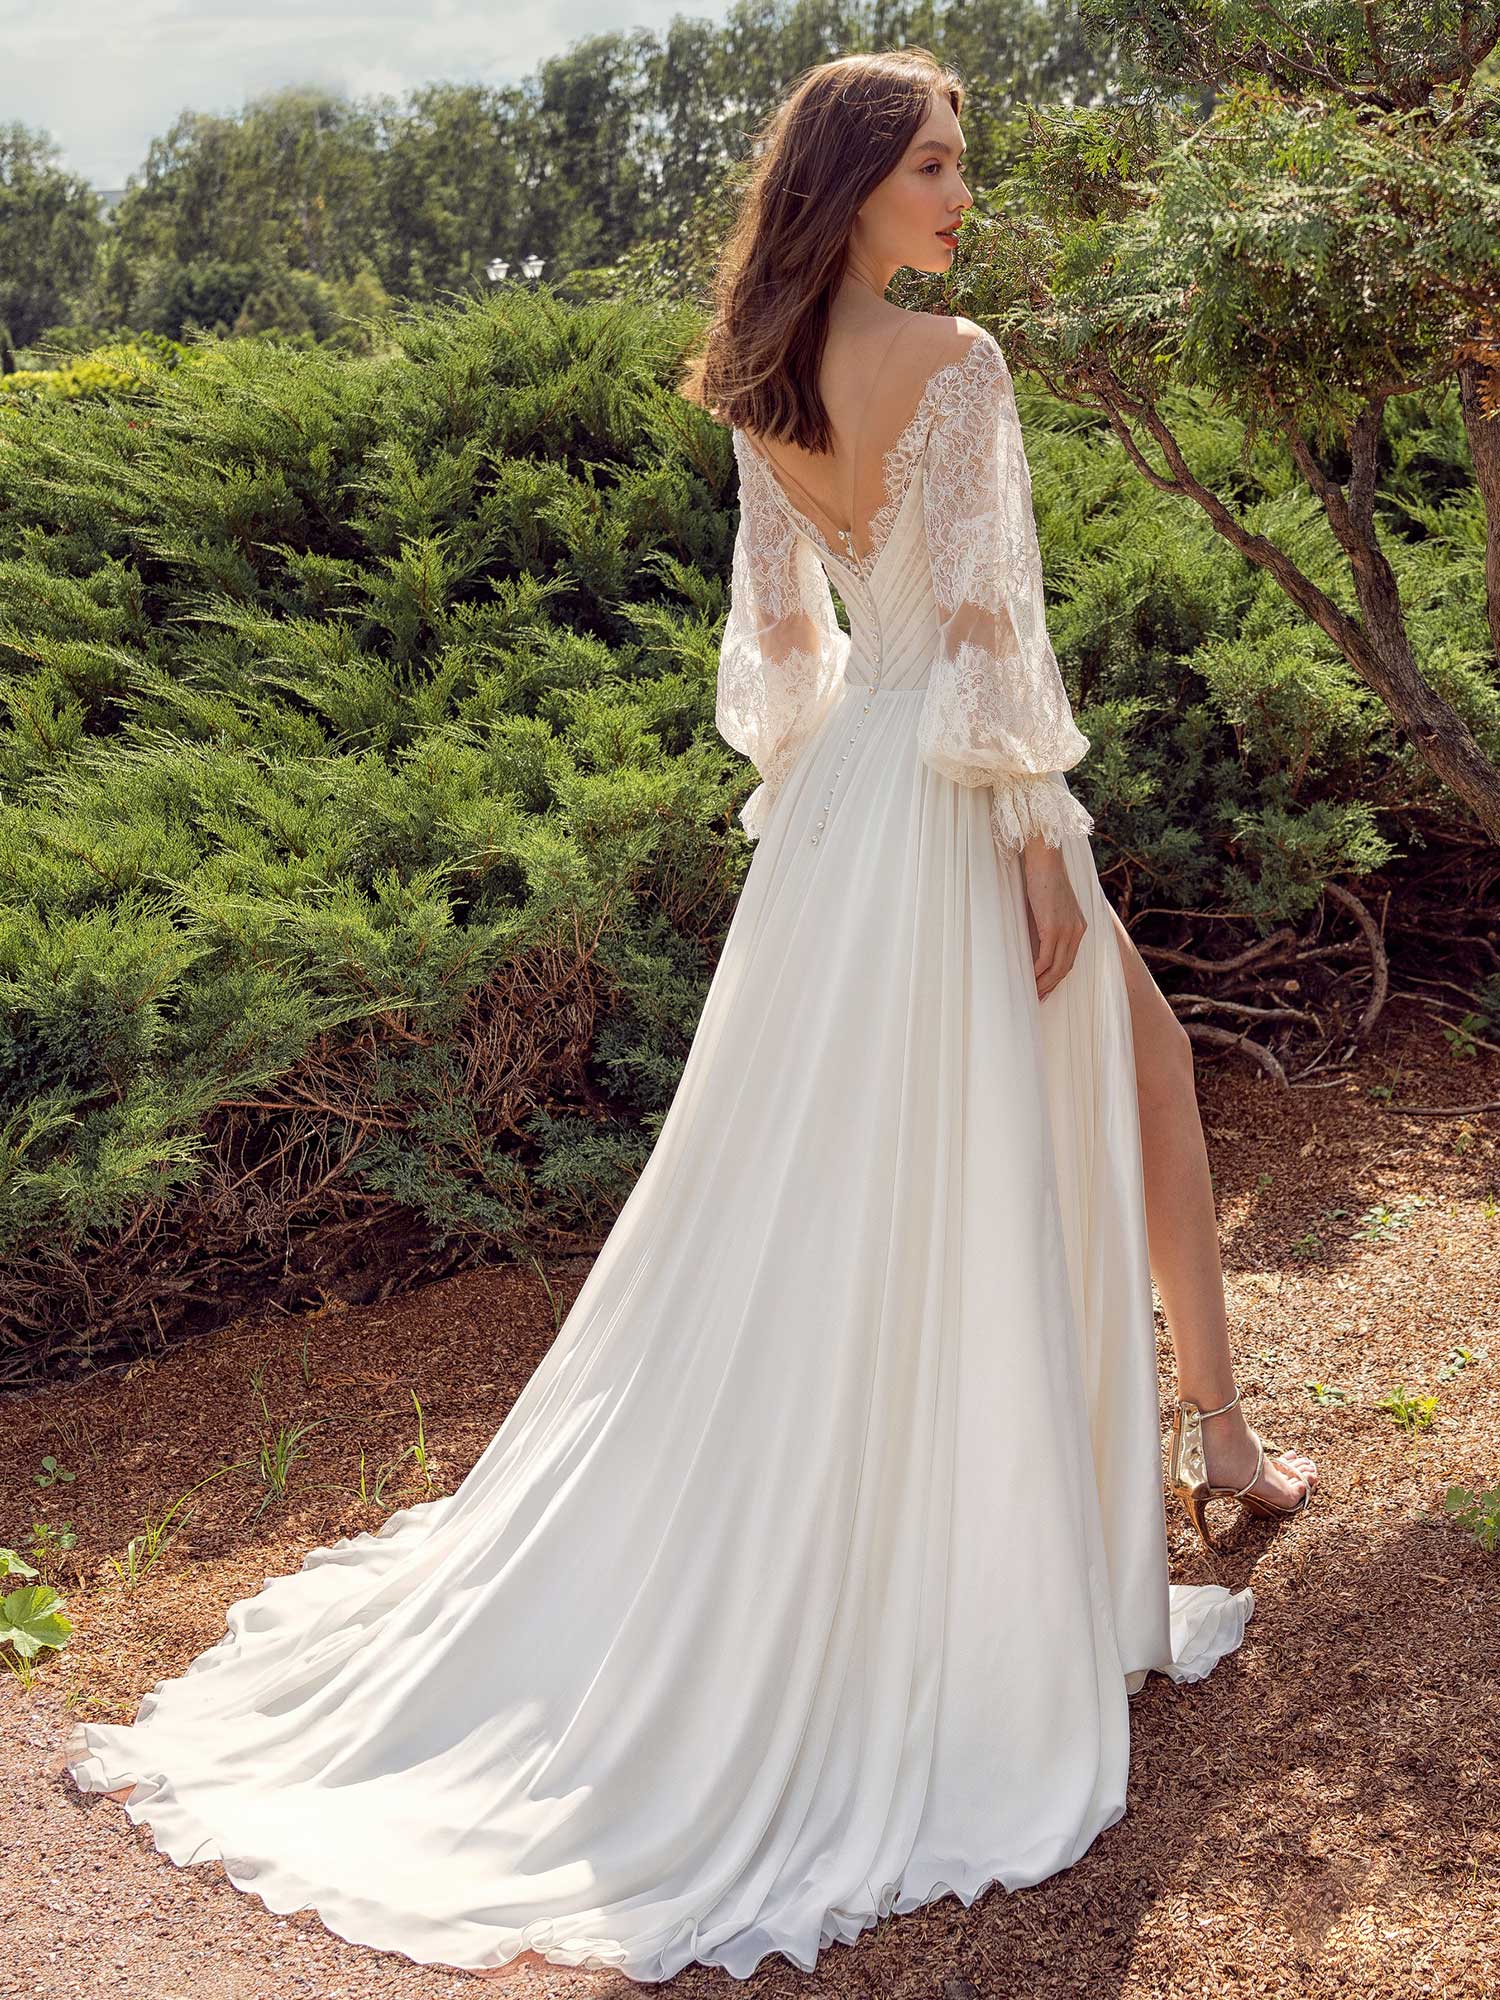 Off the shoulder sheath wedding dress with lace bishop style sleeves